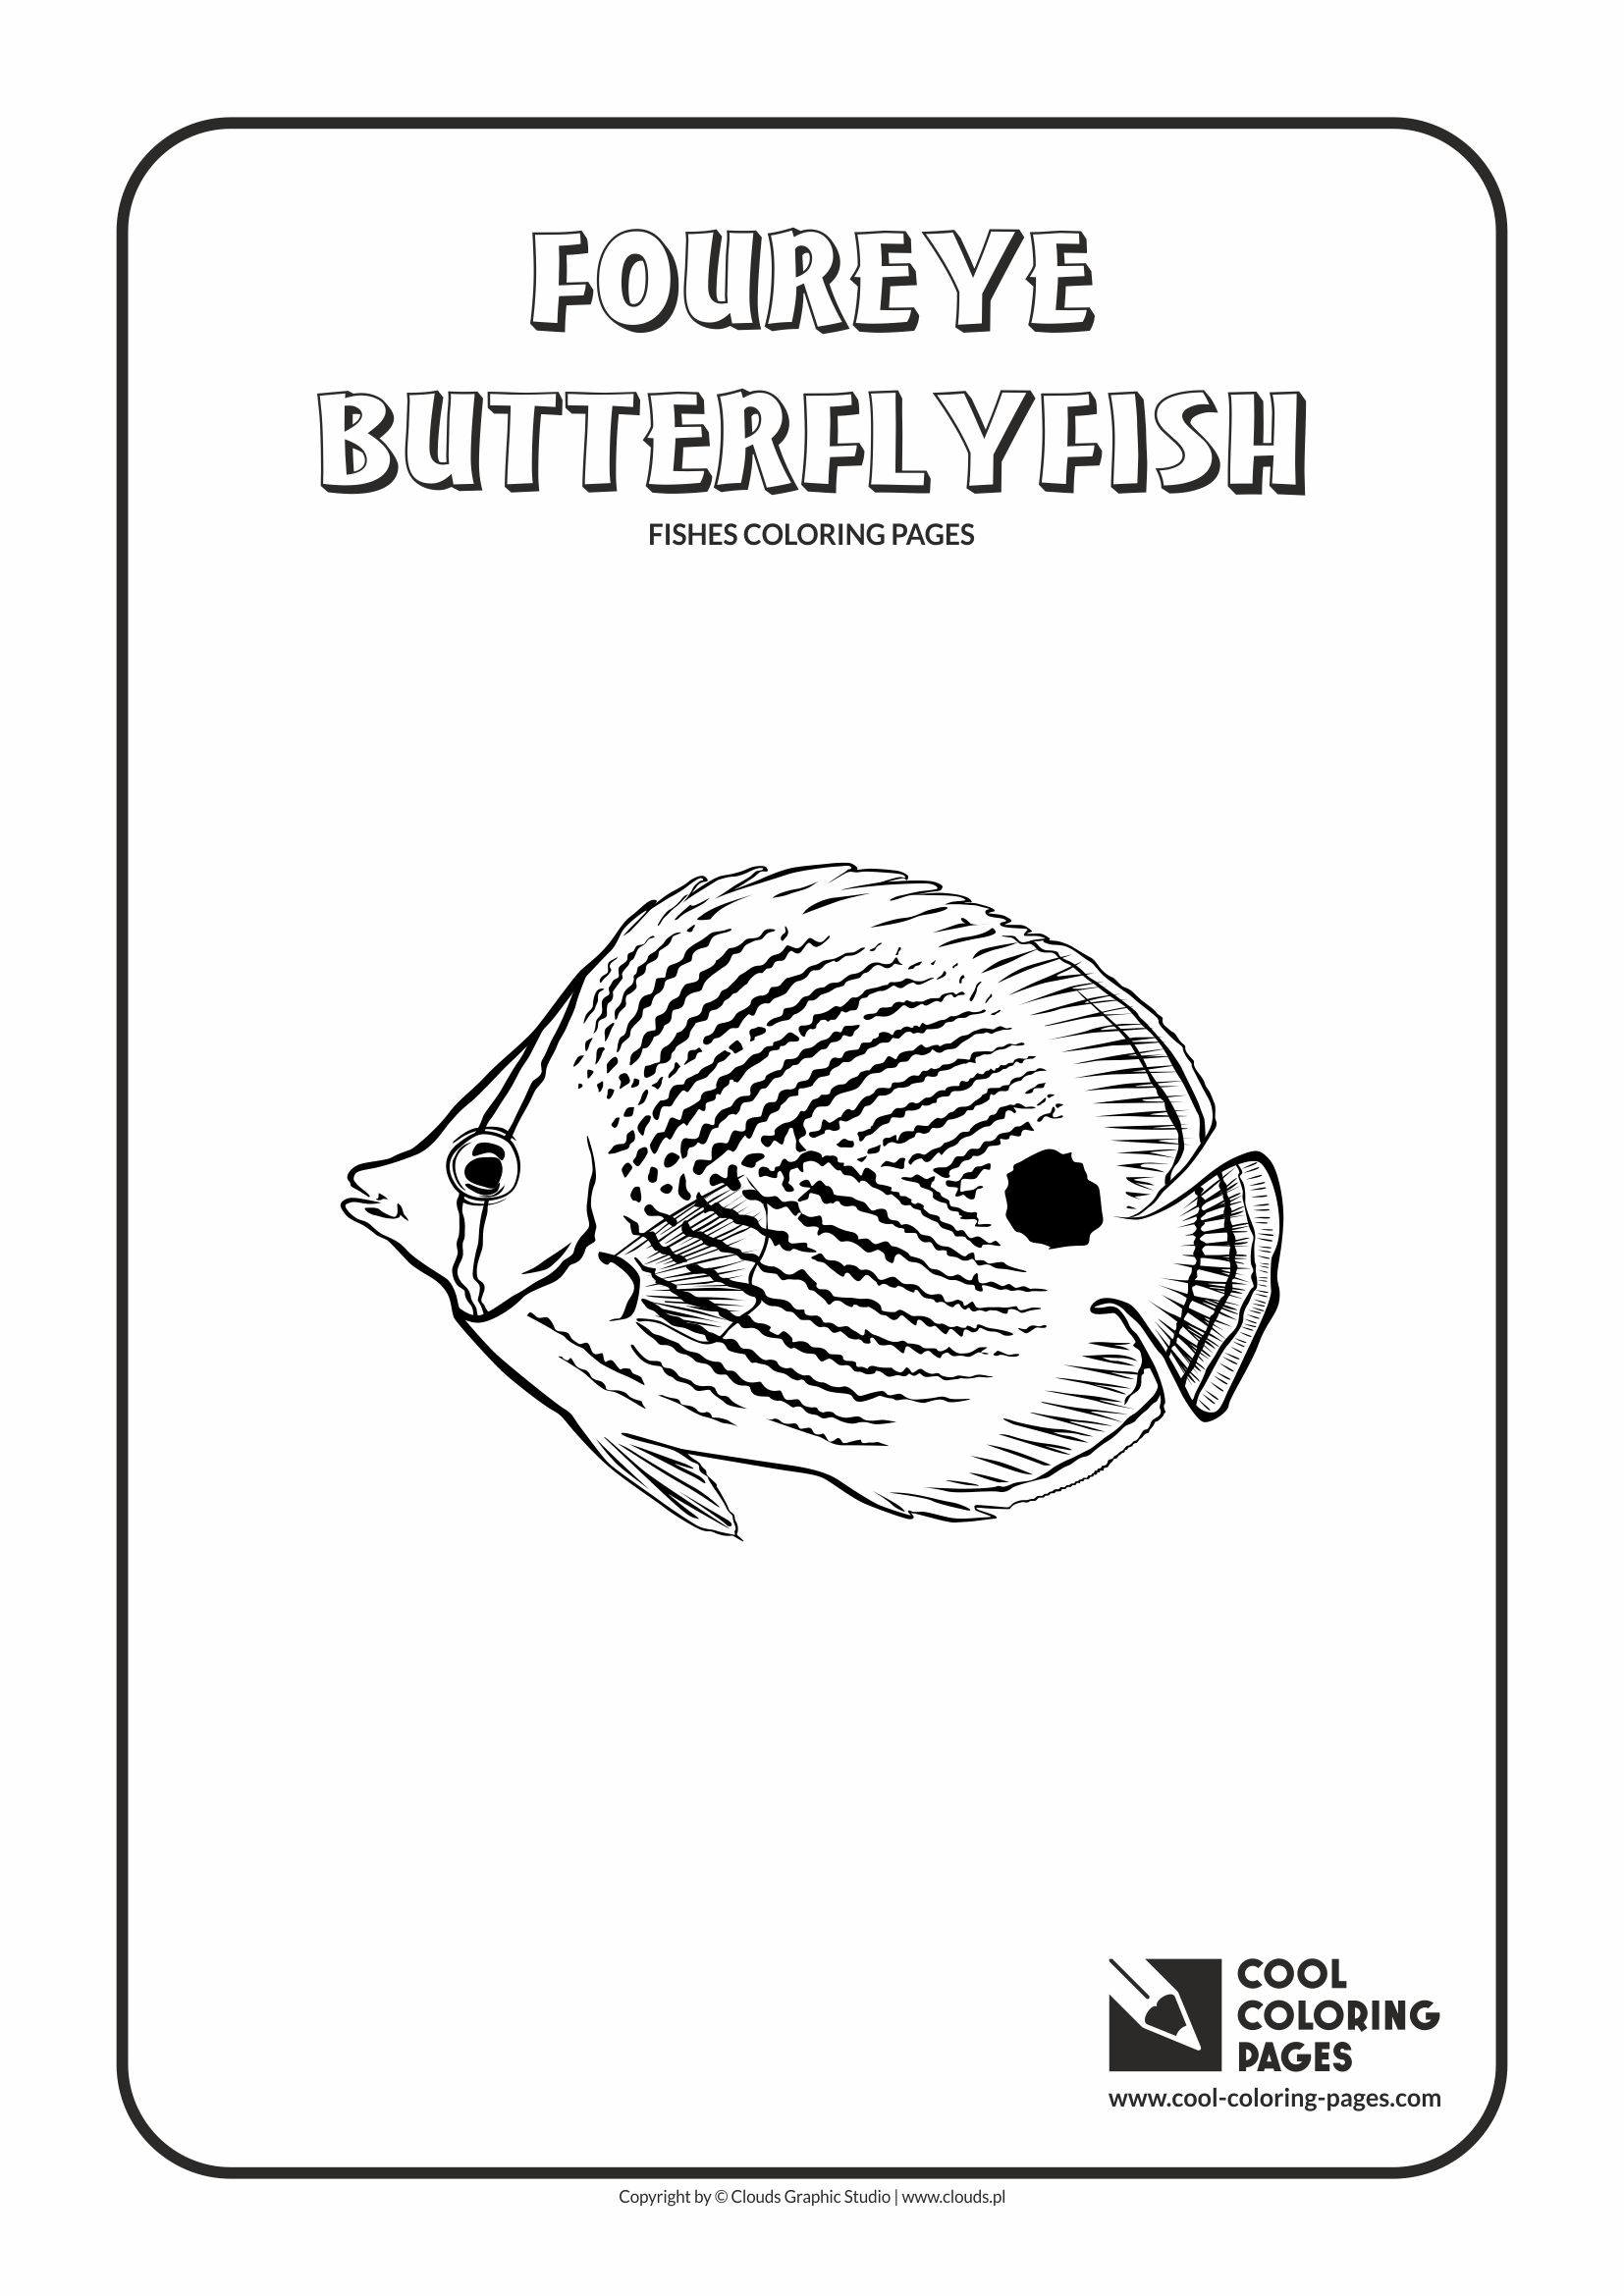 Cool Coloring Pages - Animals / Foureye butterflyfish / Coloring page with foureye butterflyfish